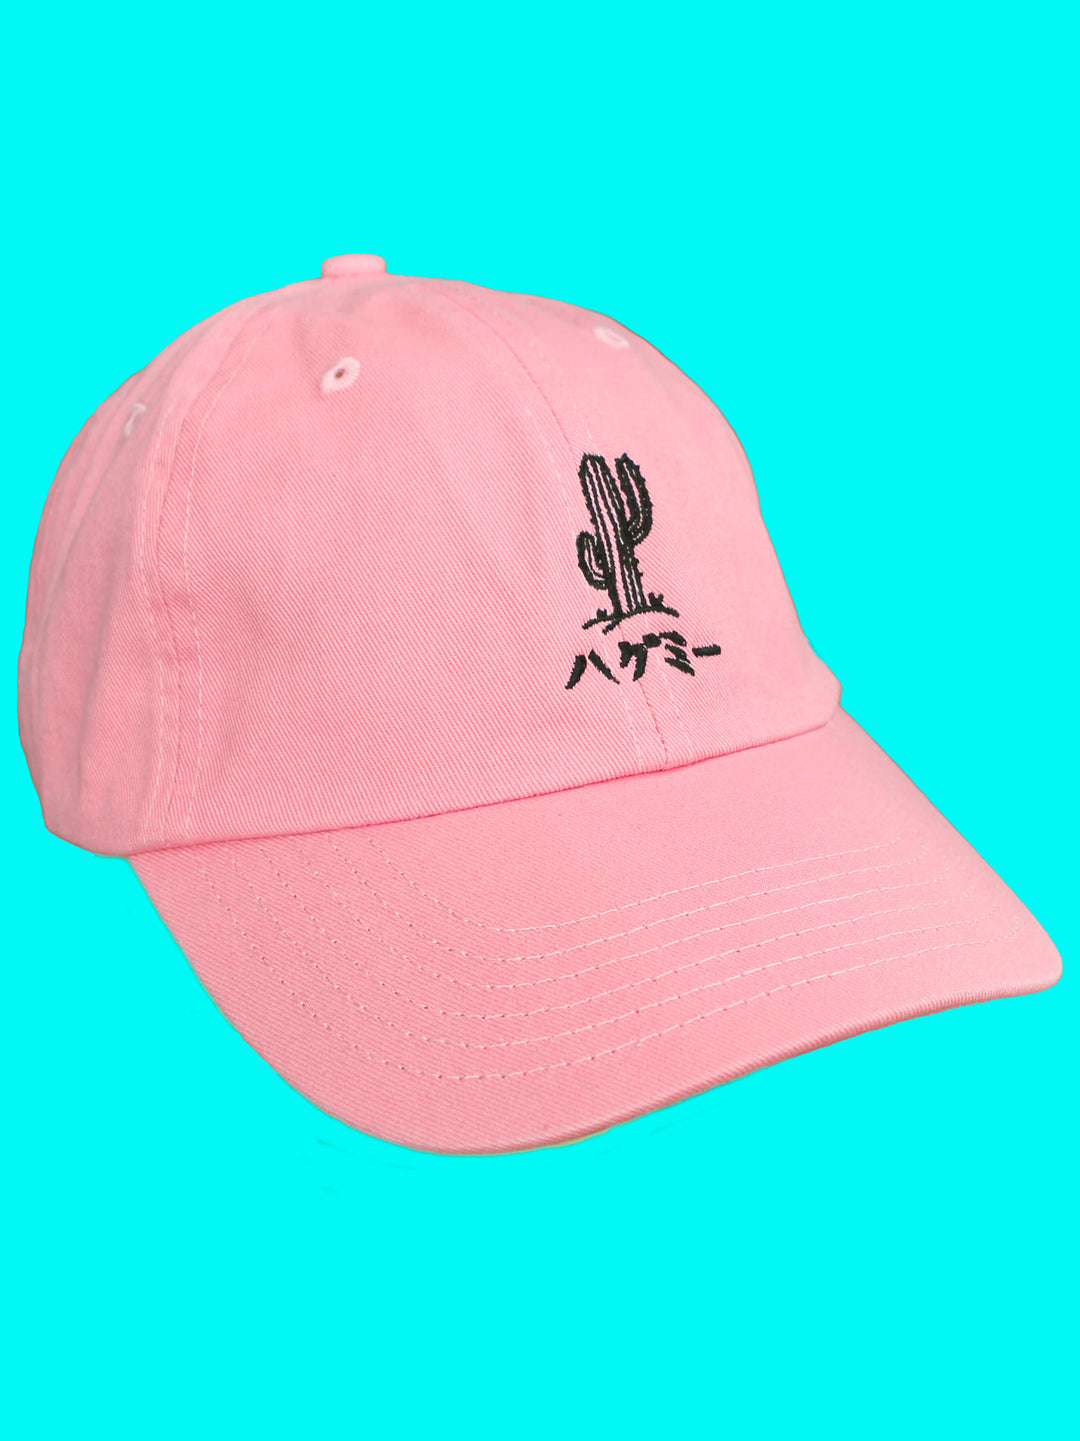 Pink polo cap with a cactus embroidered on the front that reads 'hug me' in Japanese.